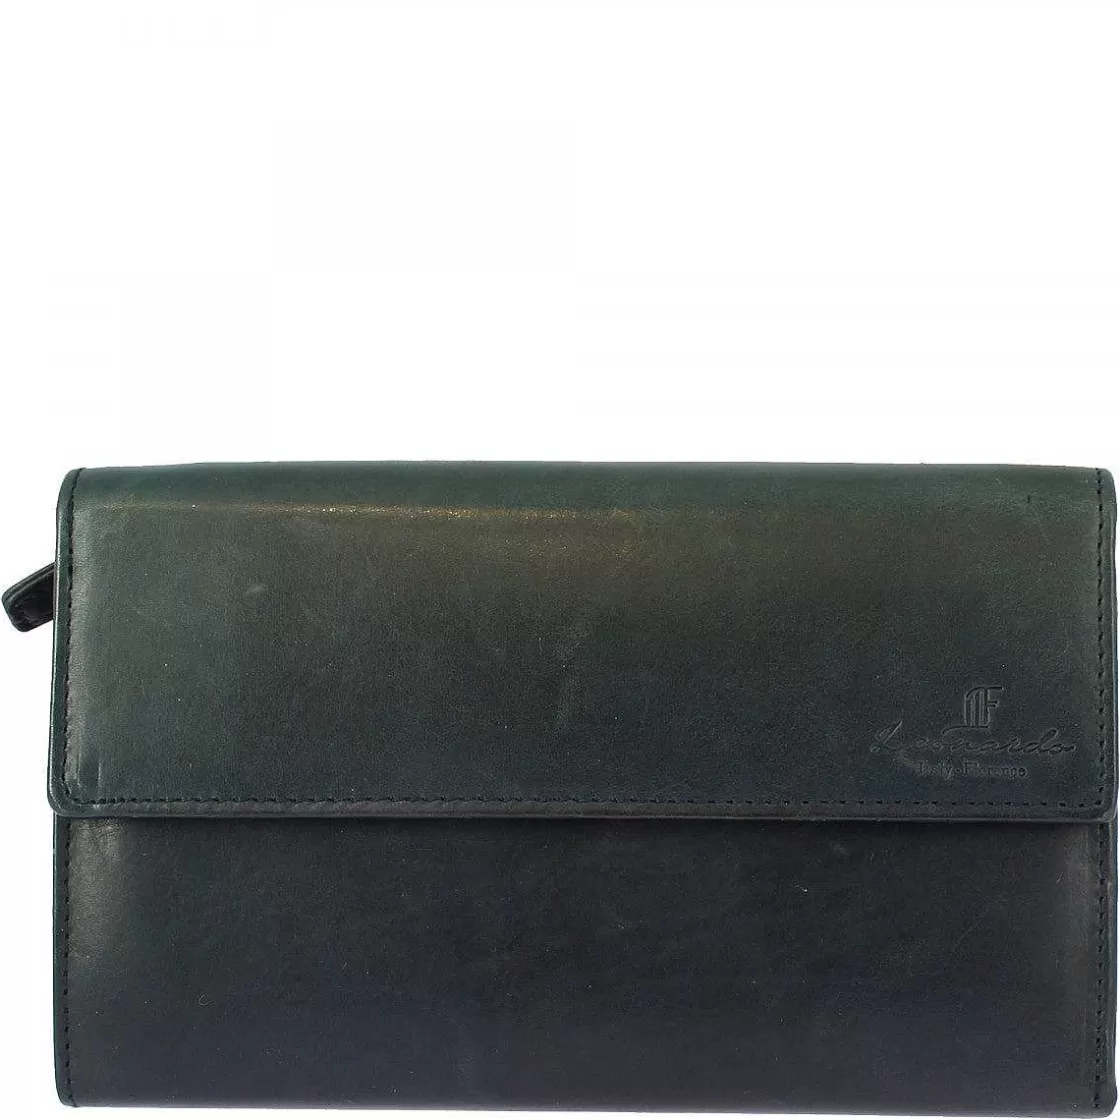 Leonardo Wallet Made Of Nappa Leather With Compartment For Credit Cards, Banknotes And Coins In Various Colors Best